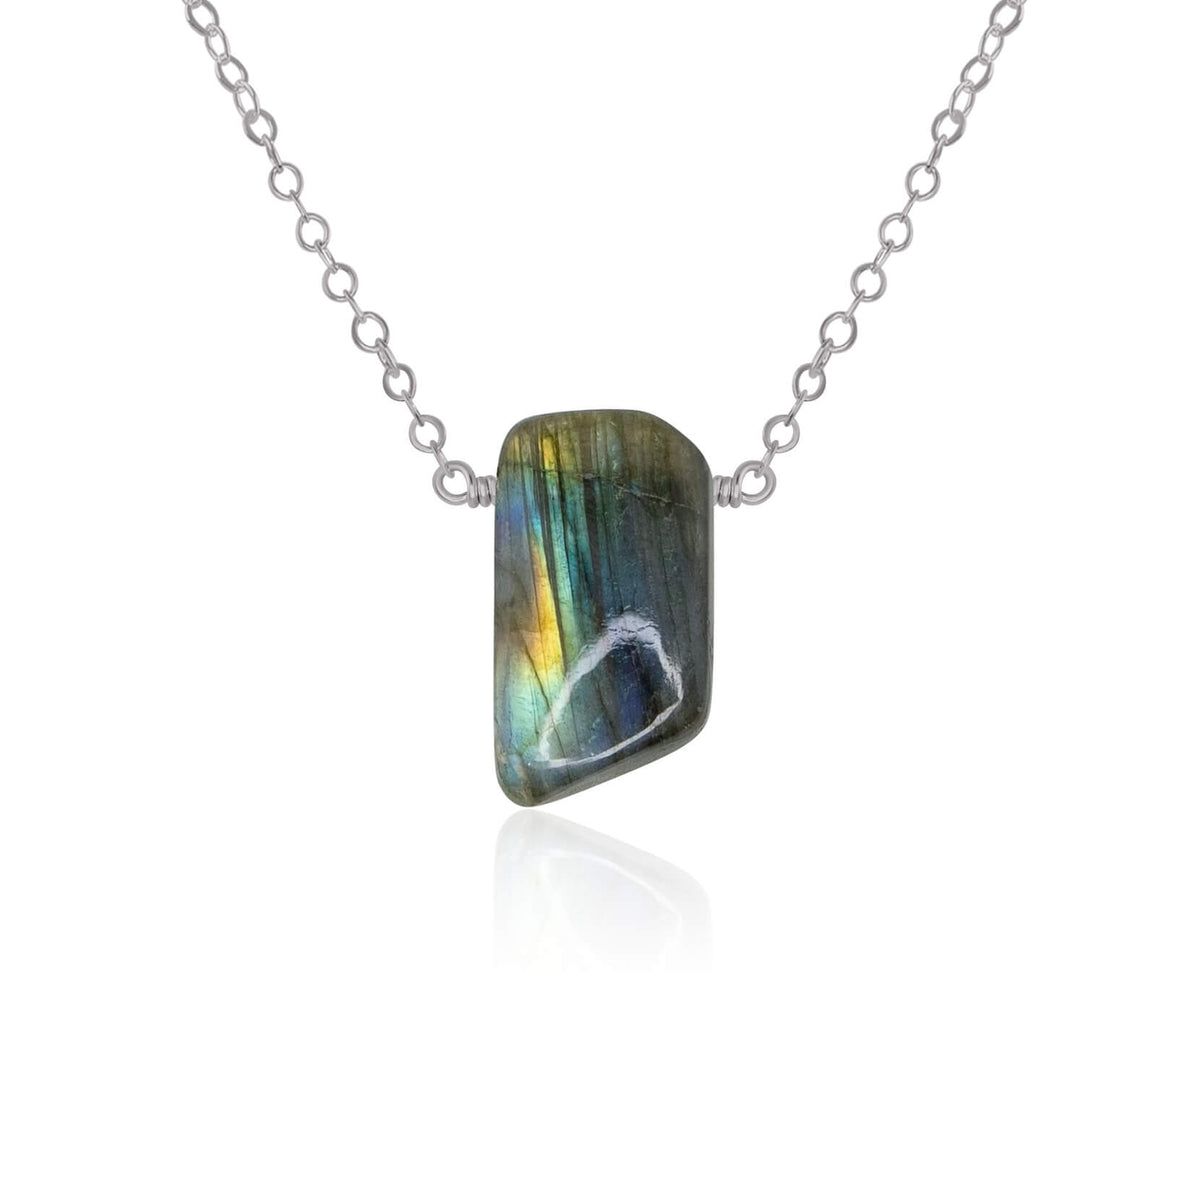 Small Smooth Slab Point Necklace - Labradorite - Stainless Steel - Luna Tide Handmade Jewellery